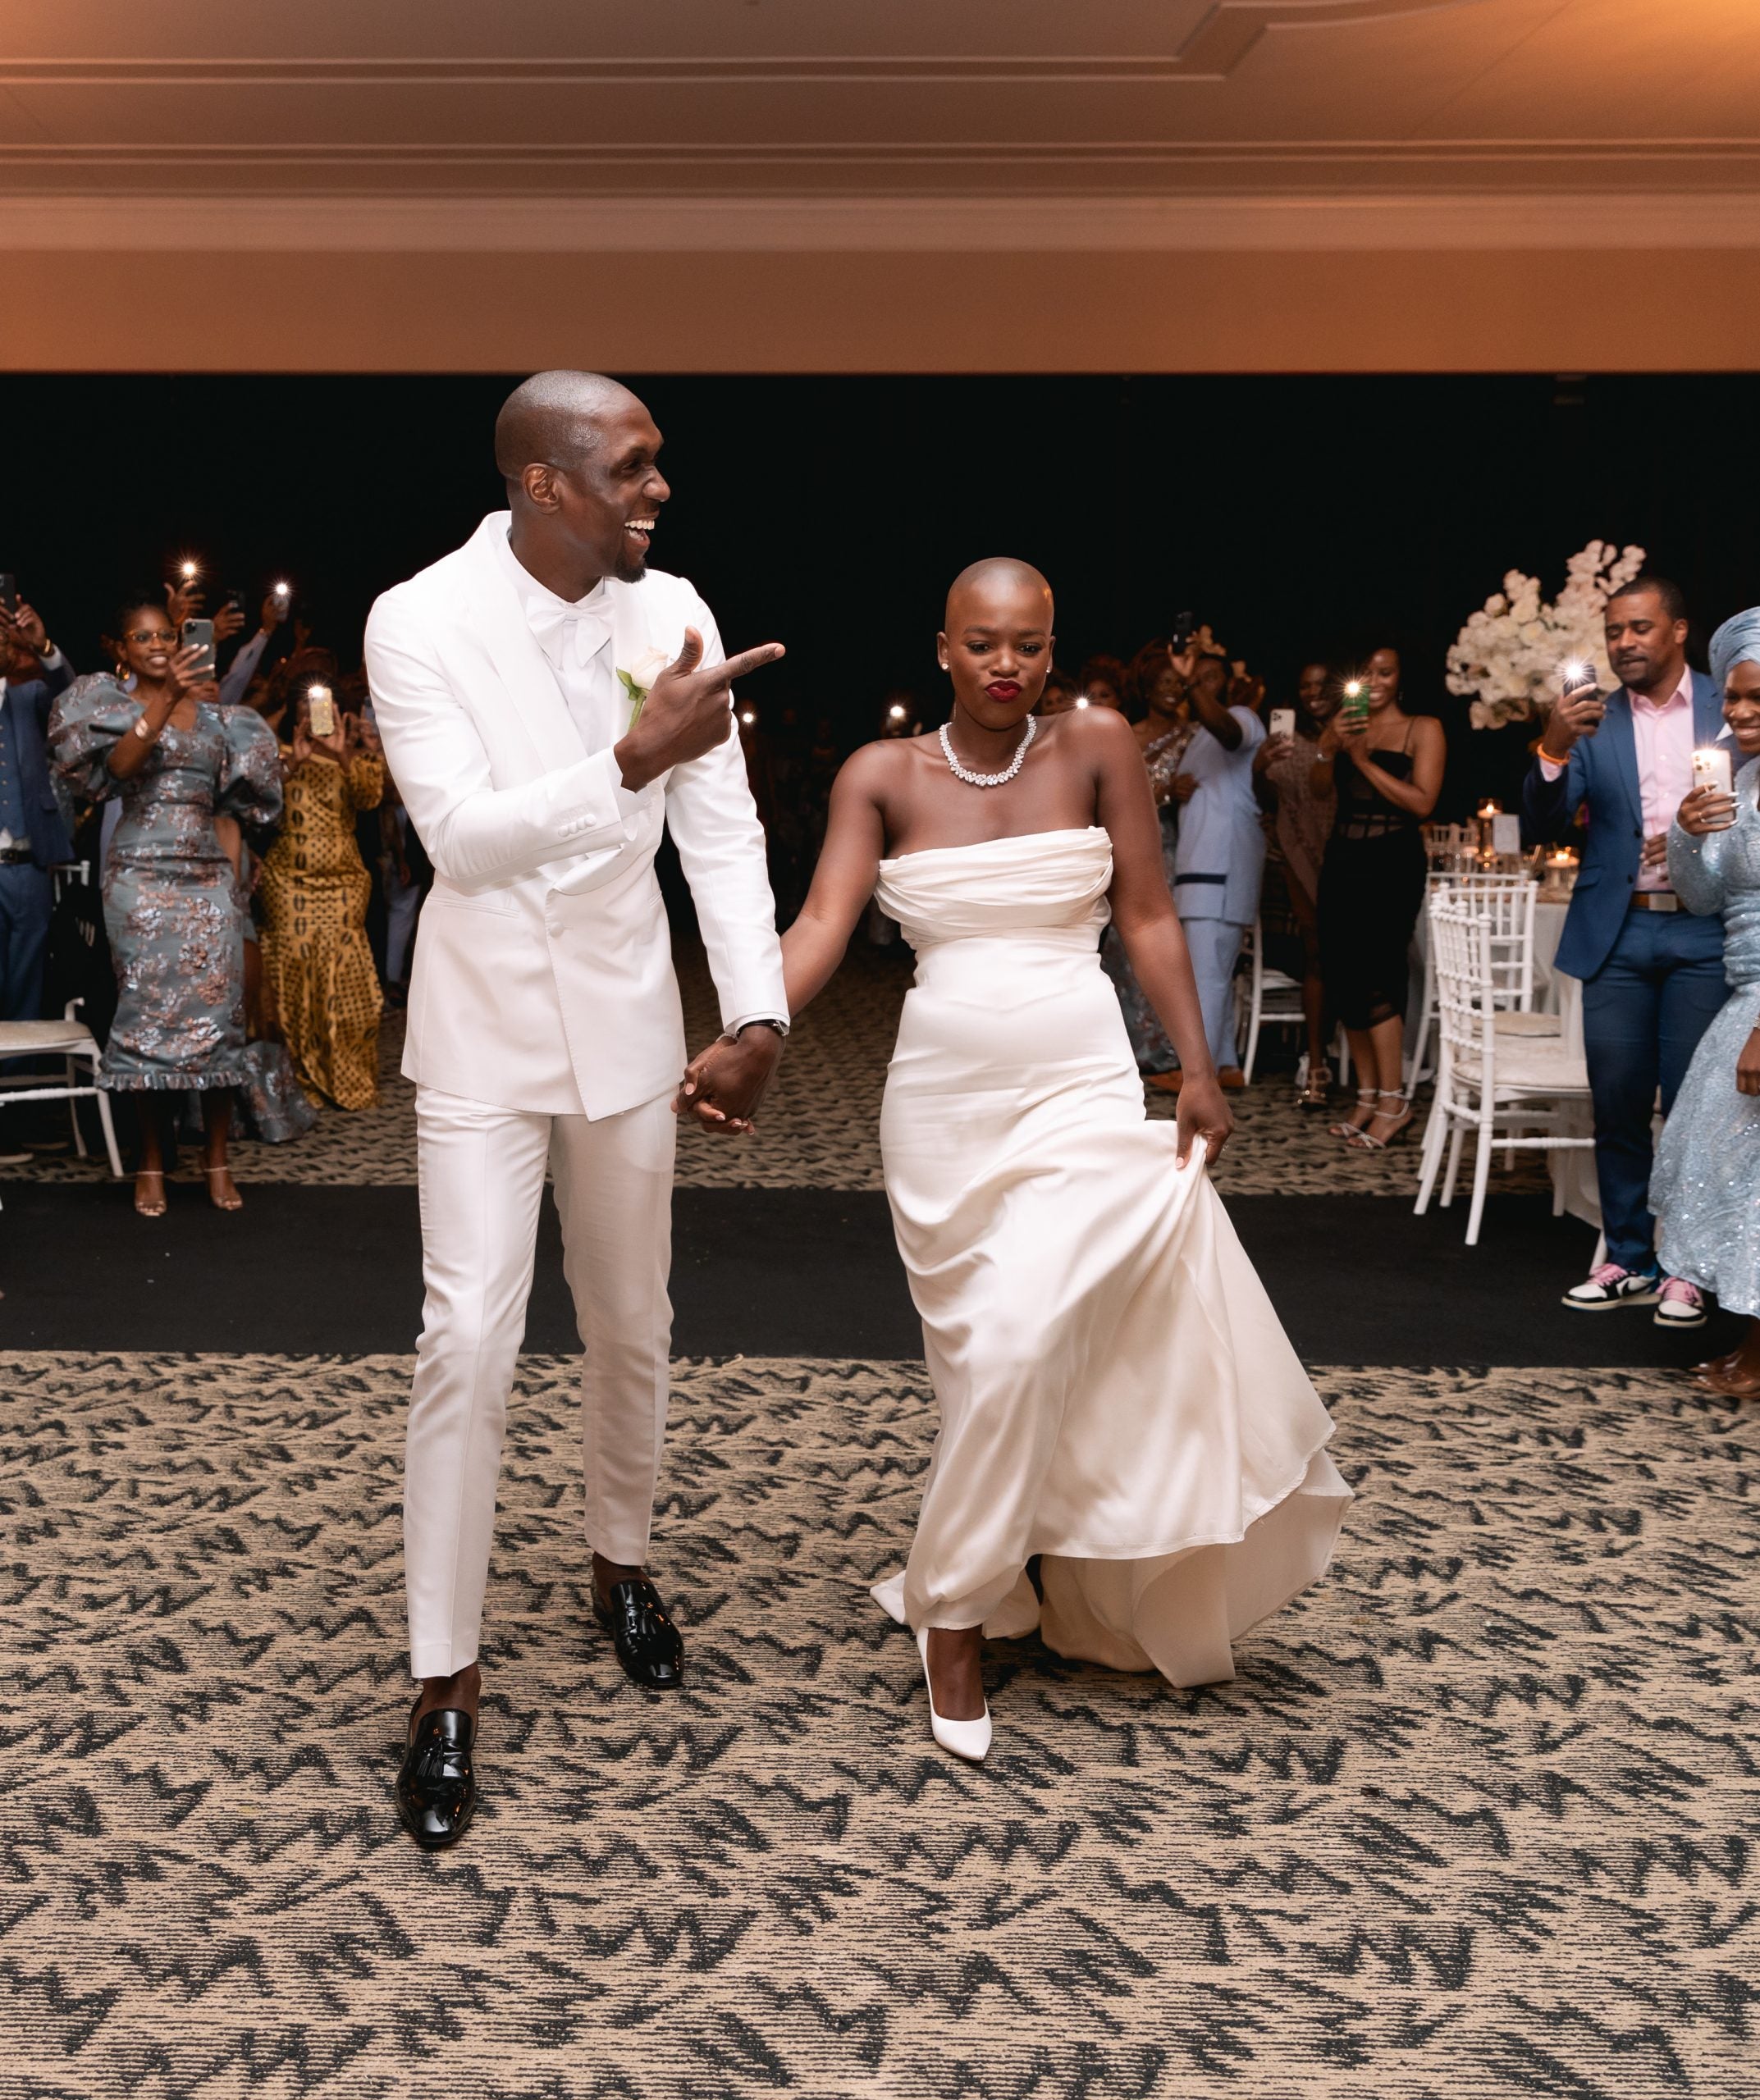 Bridal Bliss: 10 Years After A First Date At Cheesecake Factory, Lola And George Said 'I Do' In Front Of 550 Guests